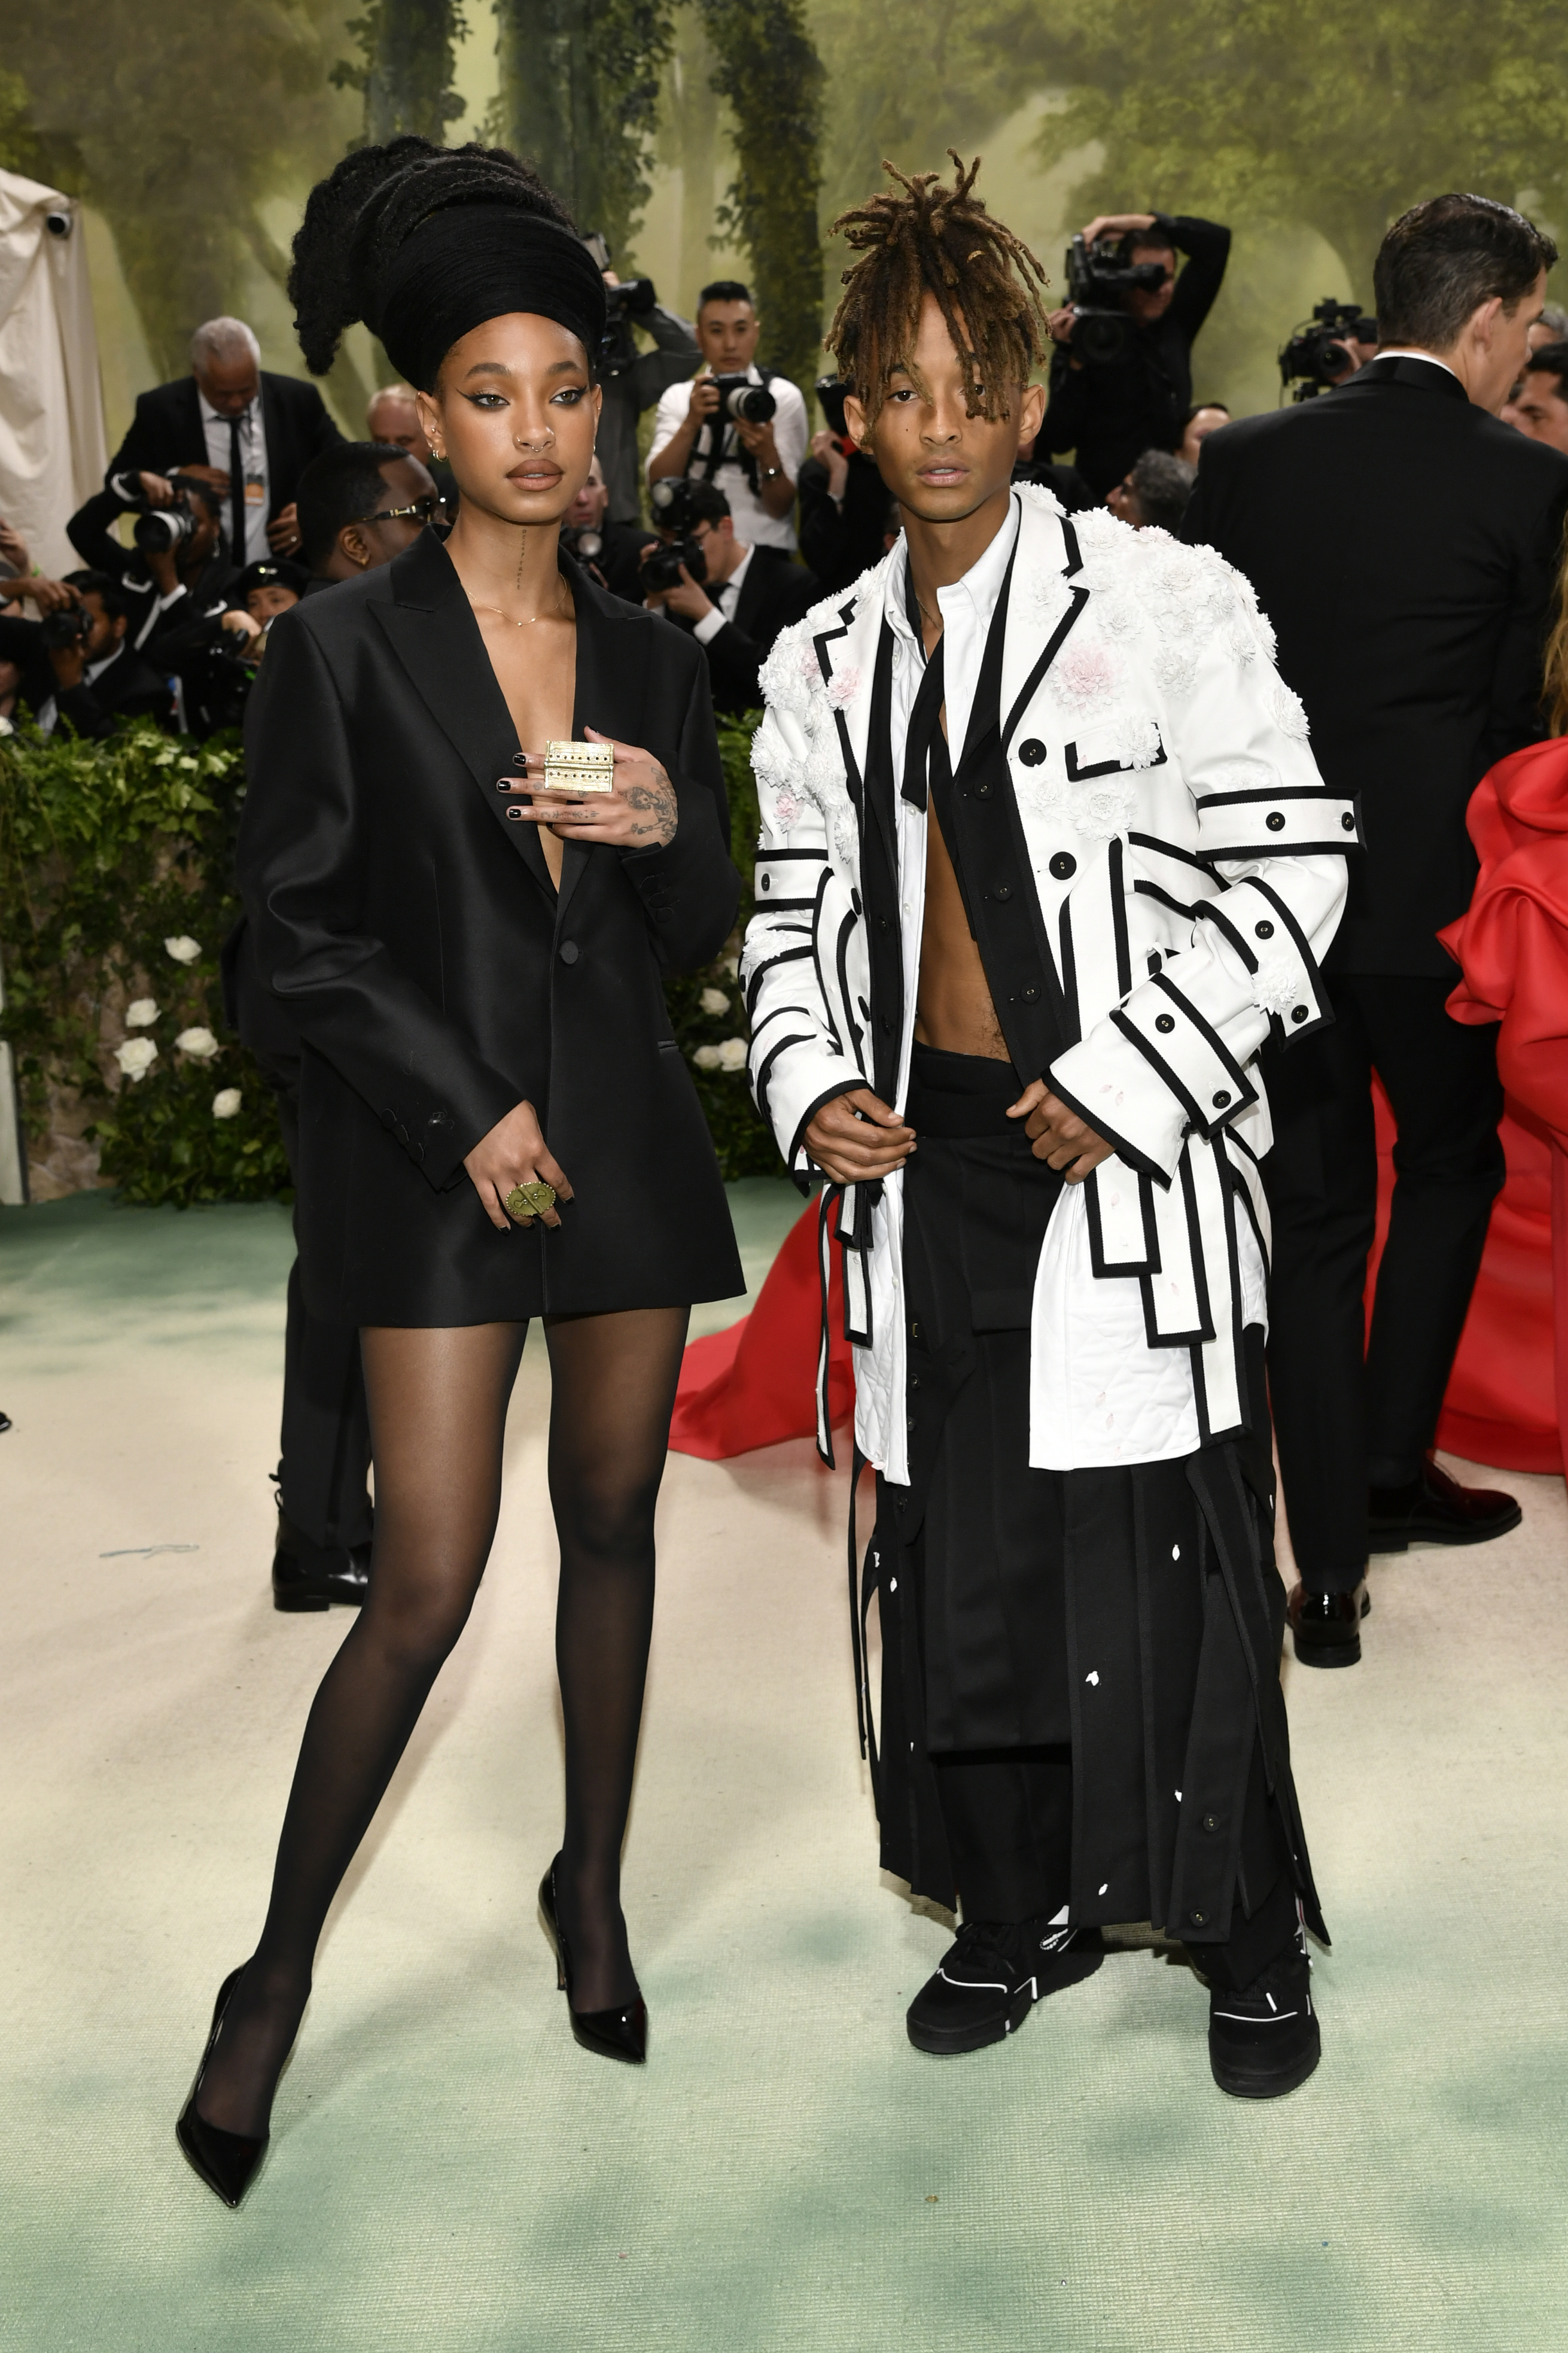 Willow Smith, left, and Jaden Smith. Photo credit: Evan Agostini/Invision/The Associated Press